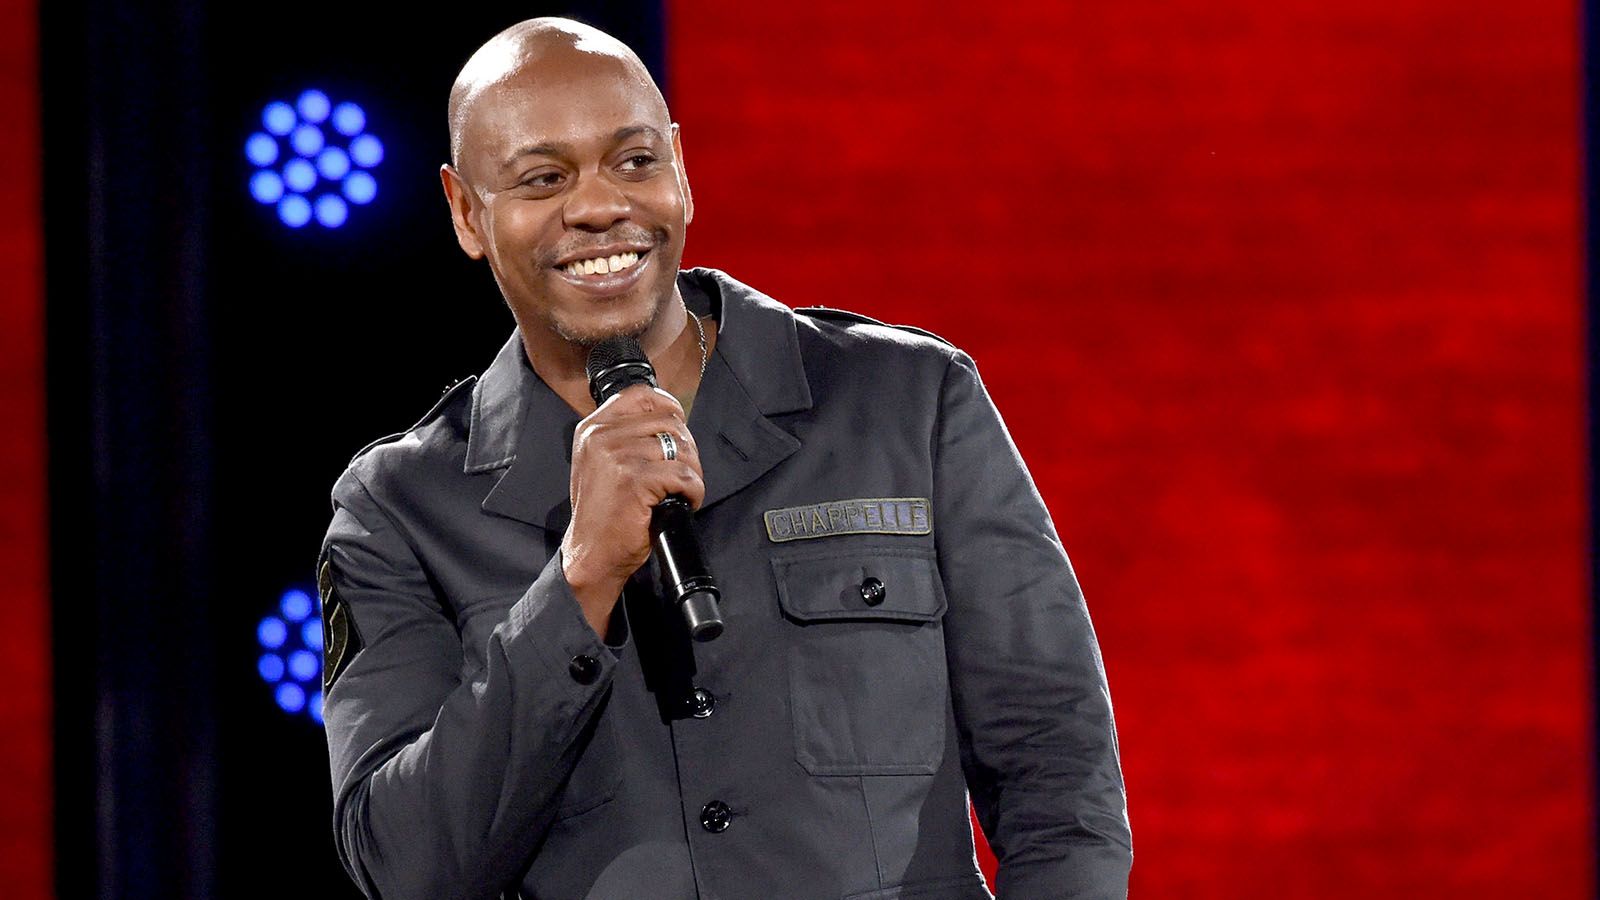 Comedian Dave Chappelle will embark on a tour in late August.